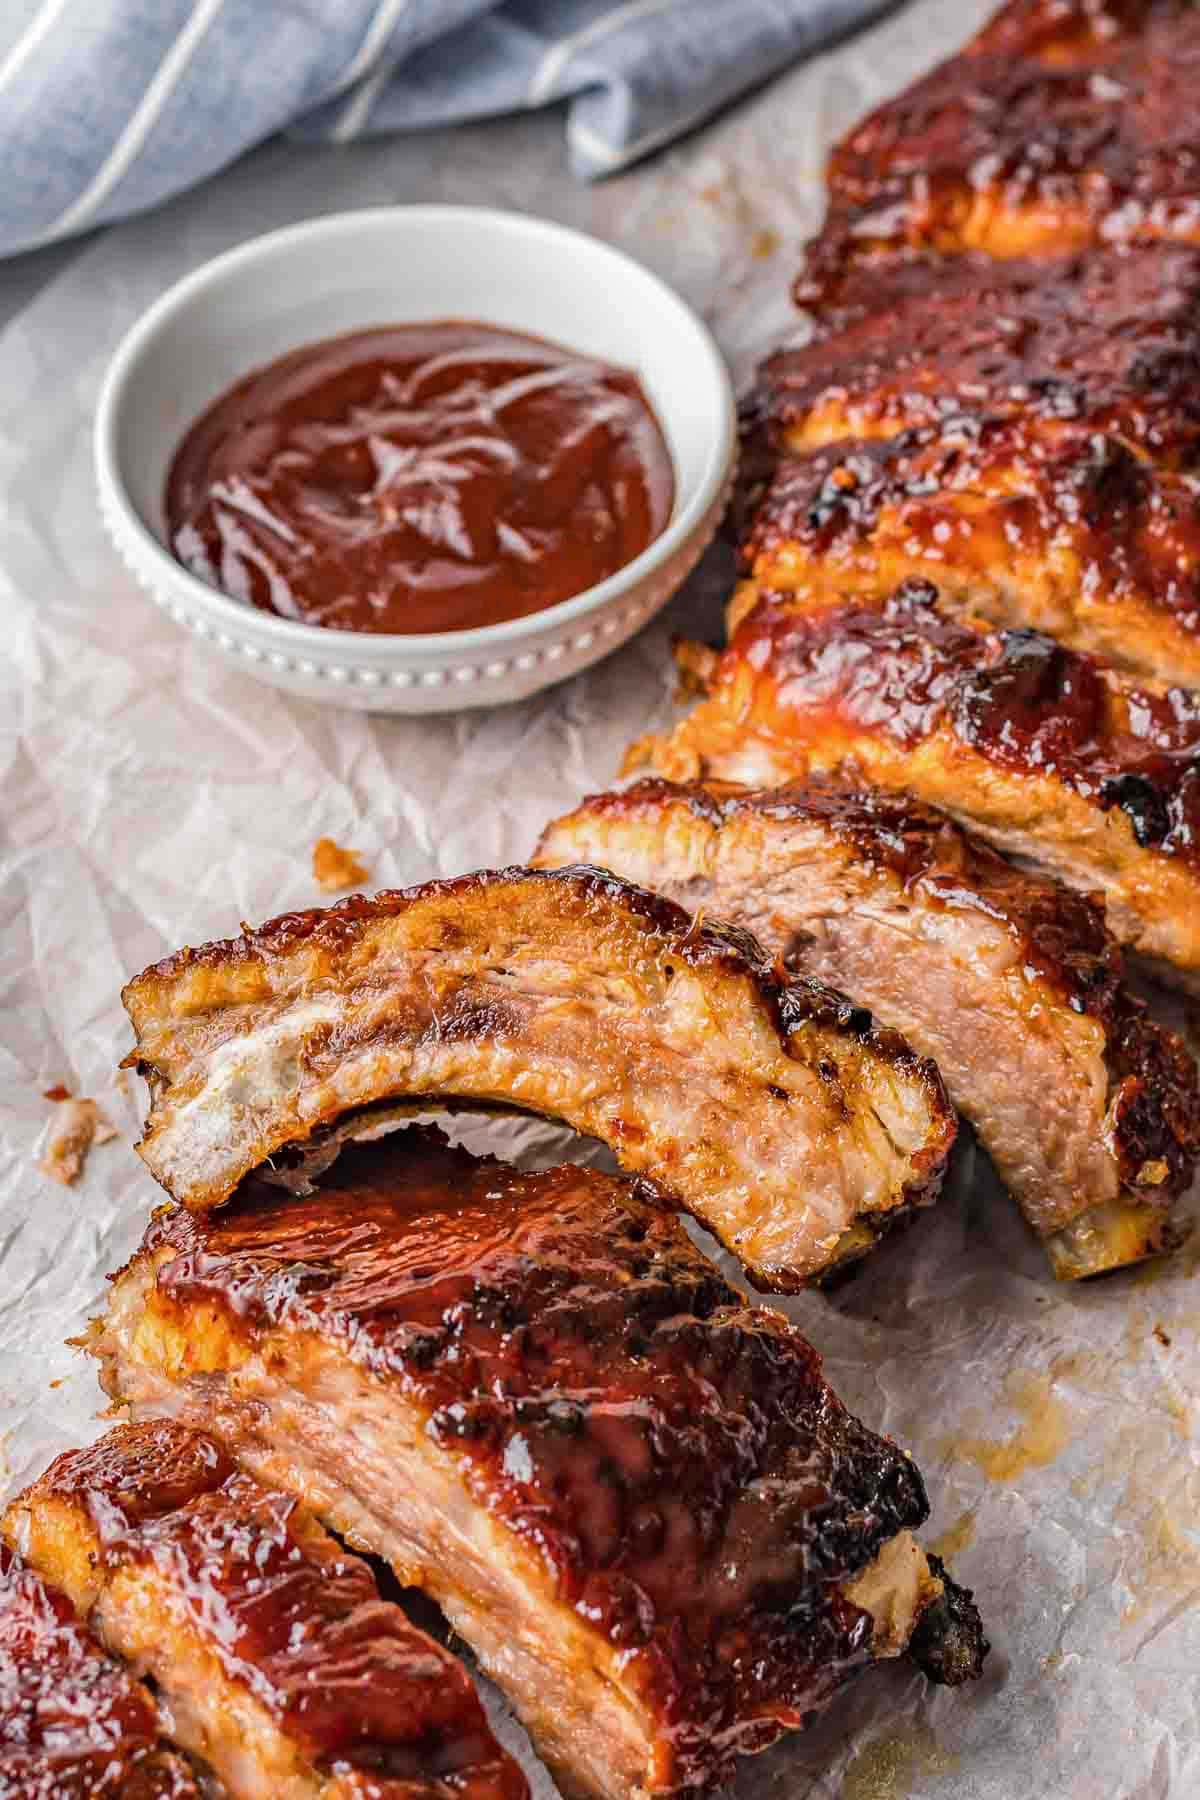 A seperated barbecue baby back ribs served with additional BBQ sauce